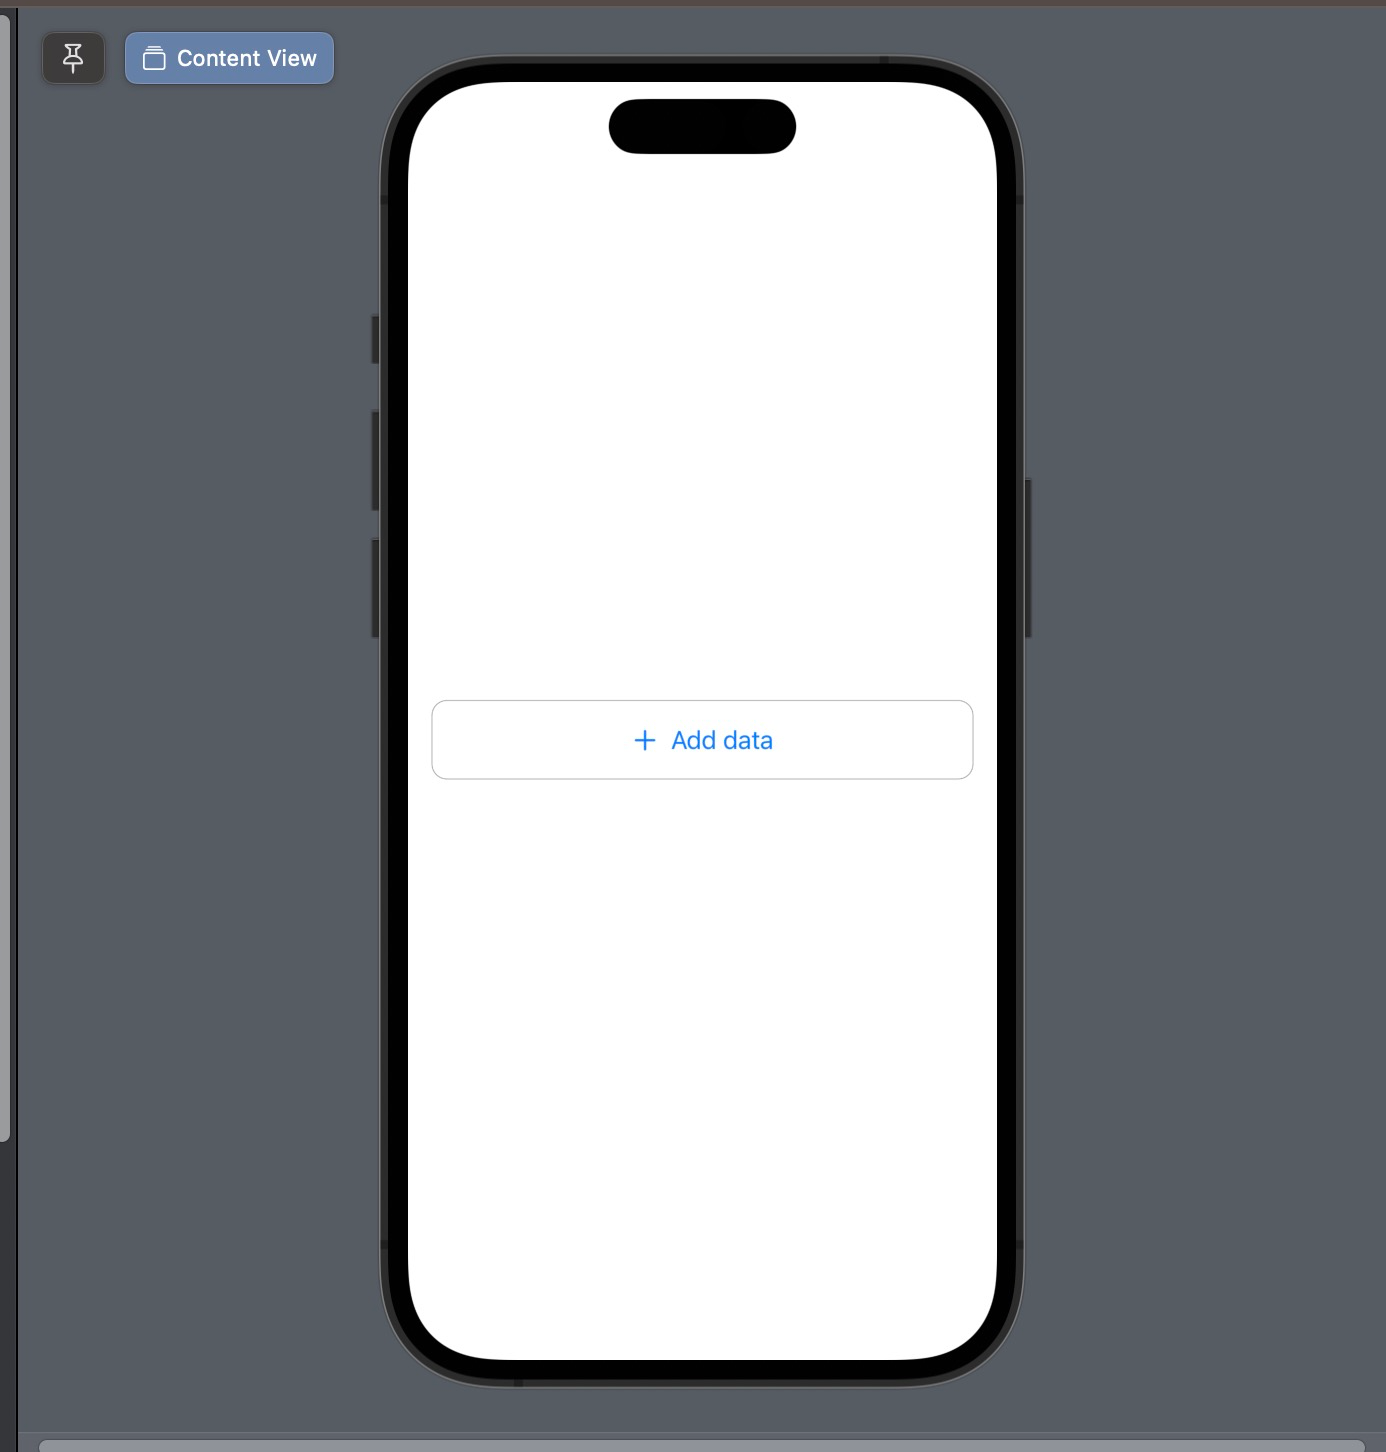 Fixing the issue of an unclickable SwiftUI Plain Button when tapping on the empty area